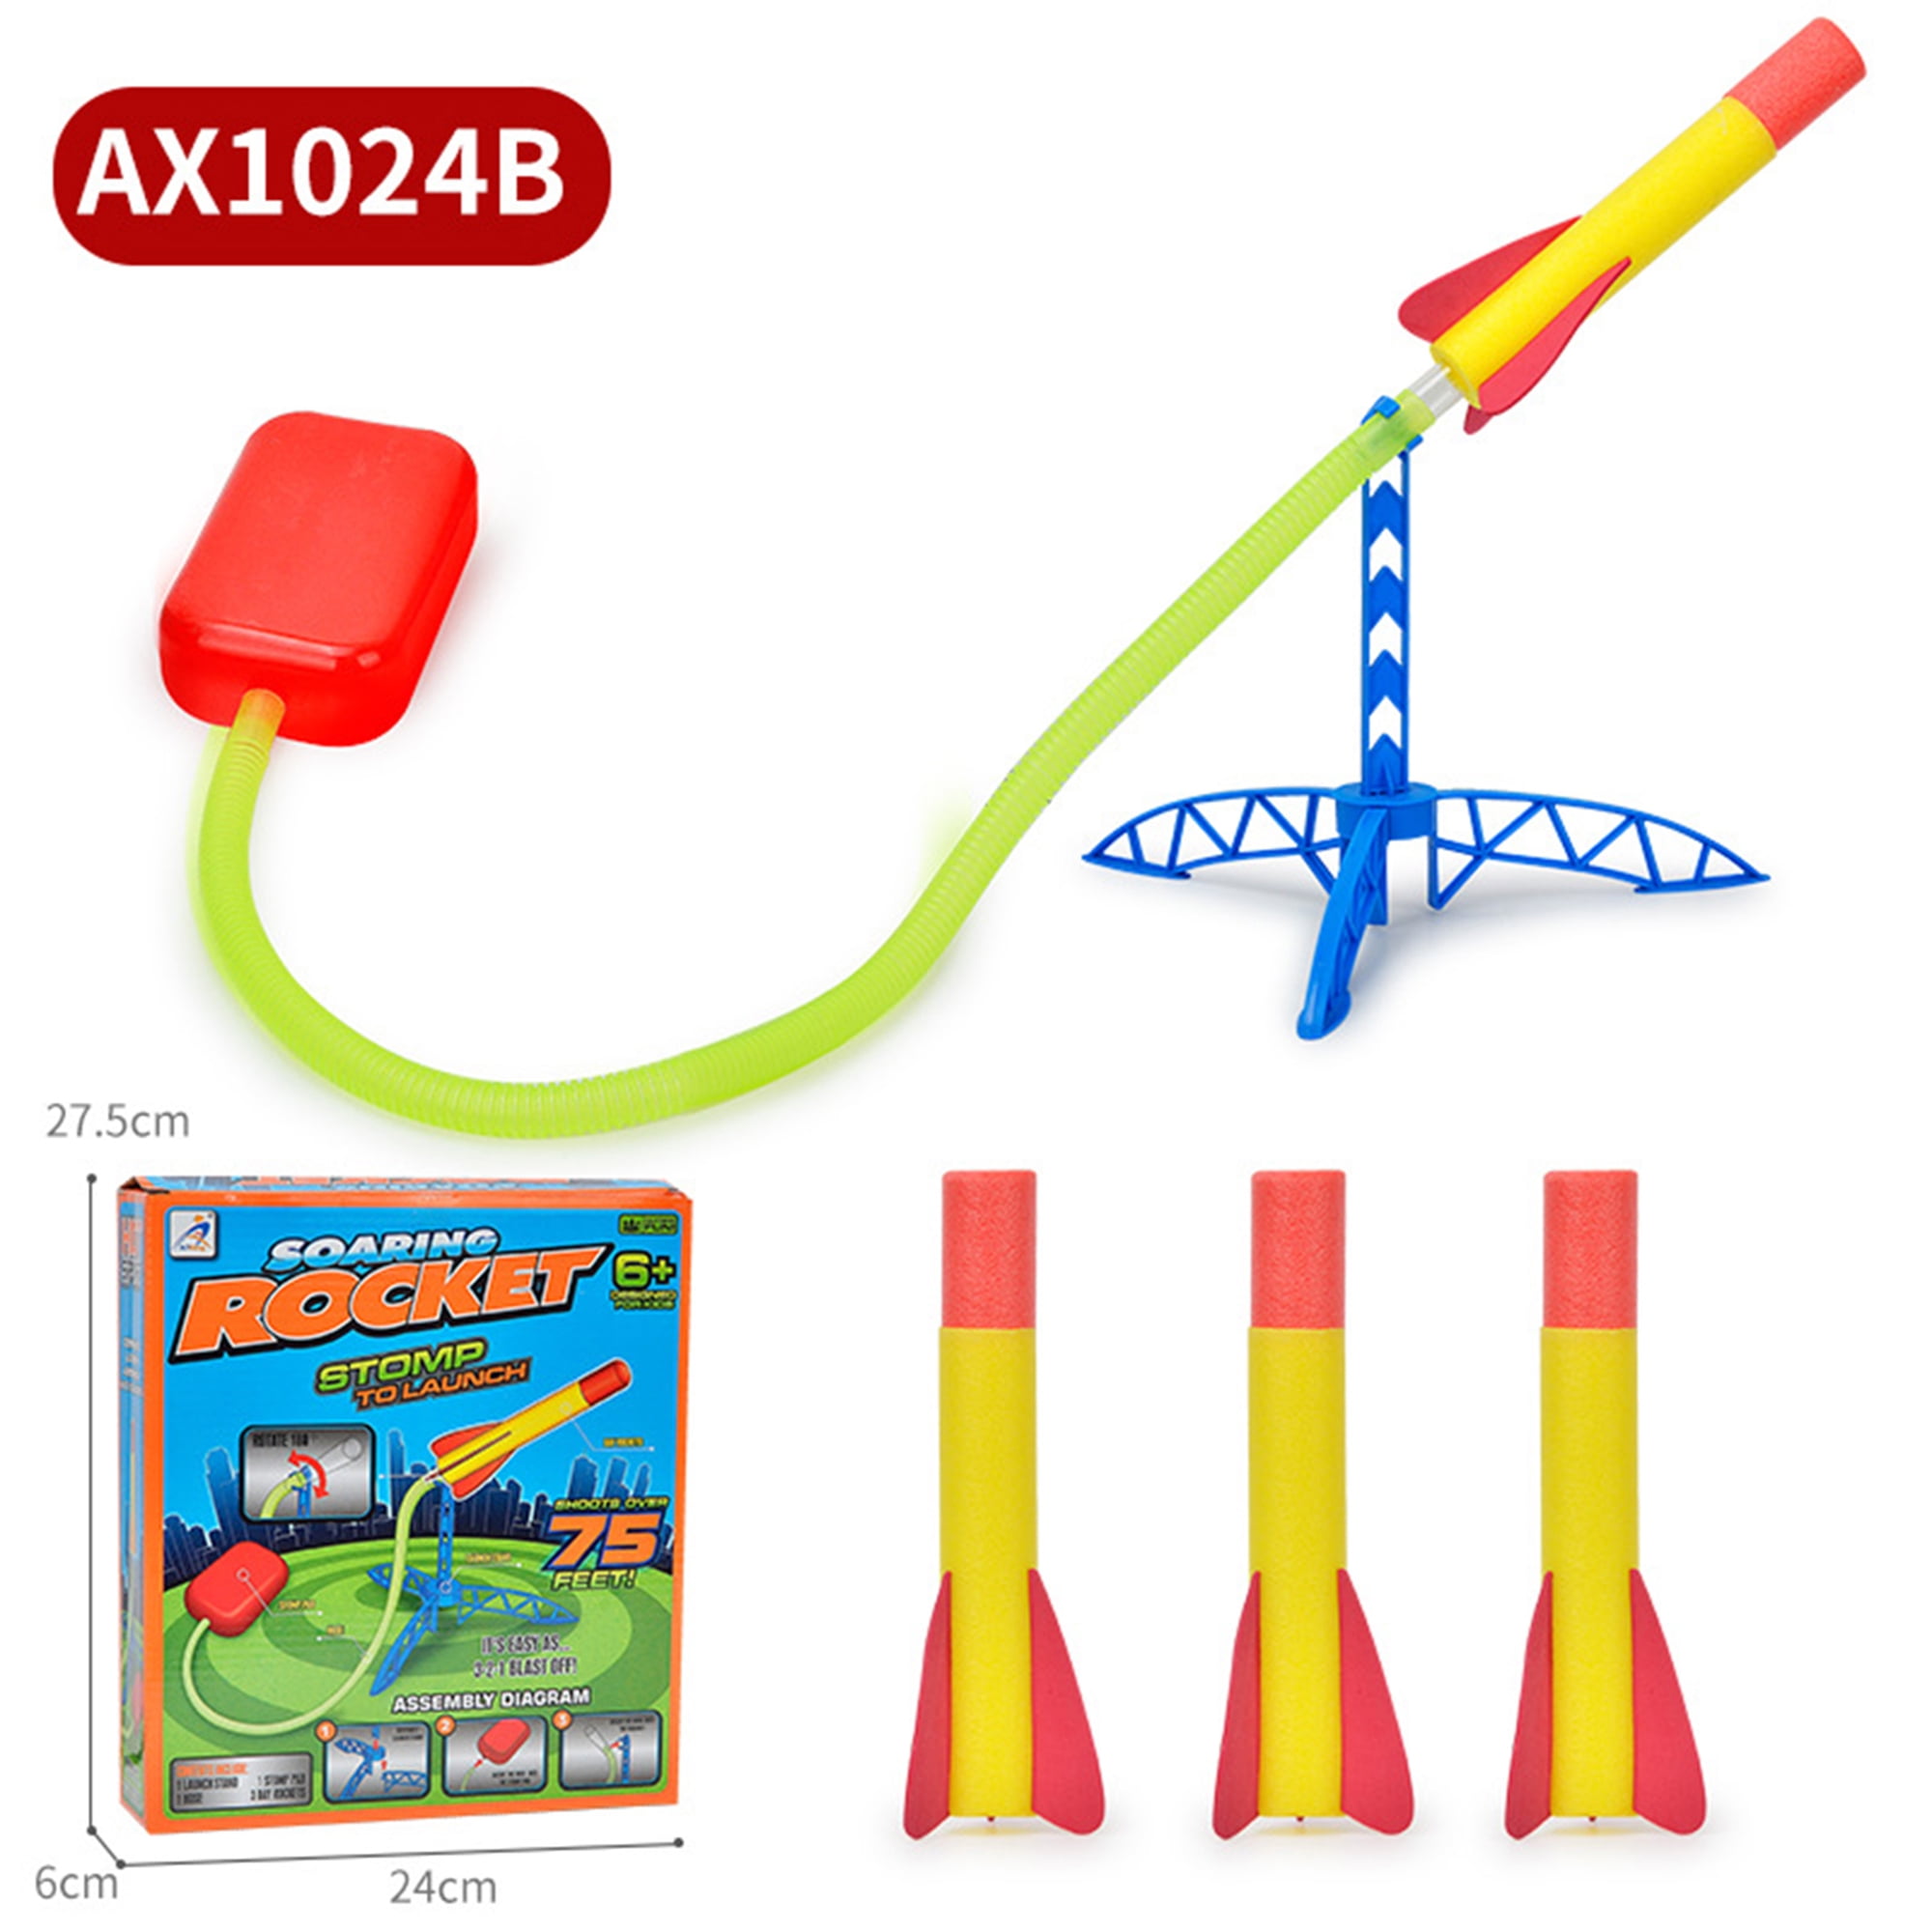 Impact Soft Rubber Tip Toy Missile x3 Shooting Board Game 